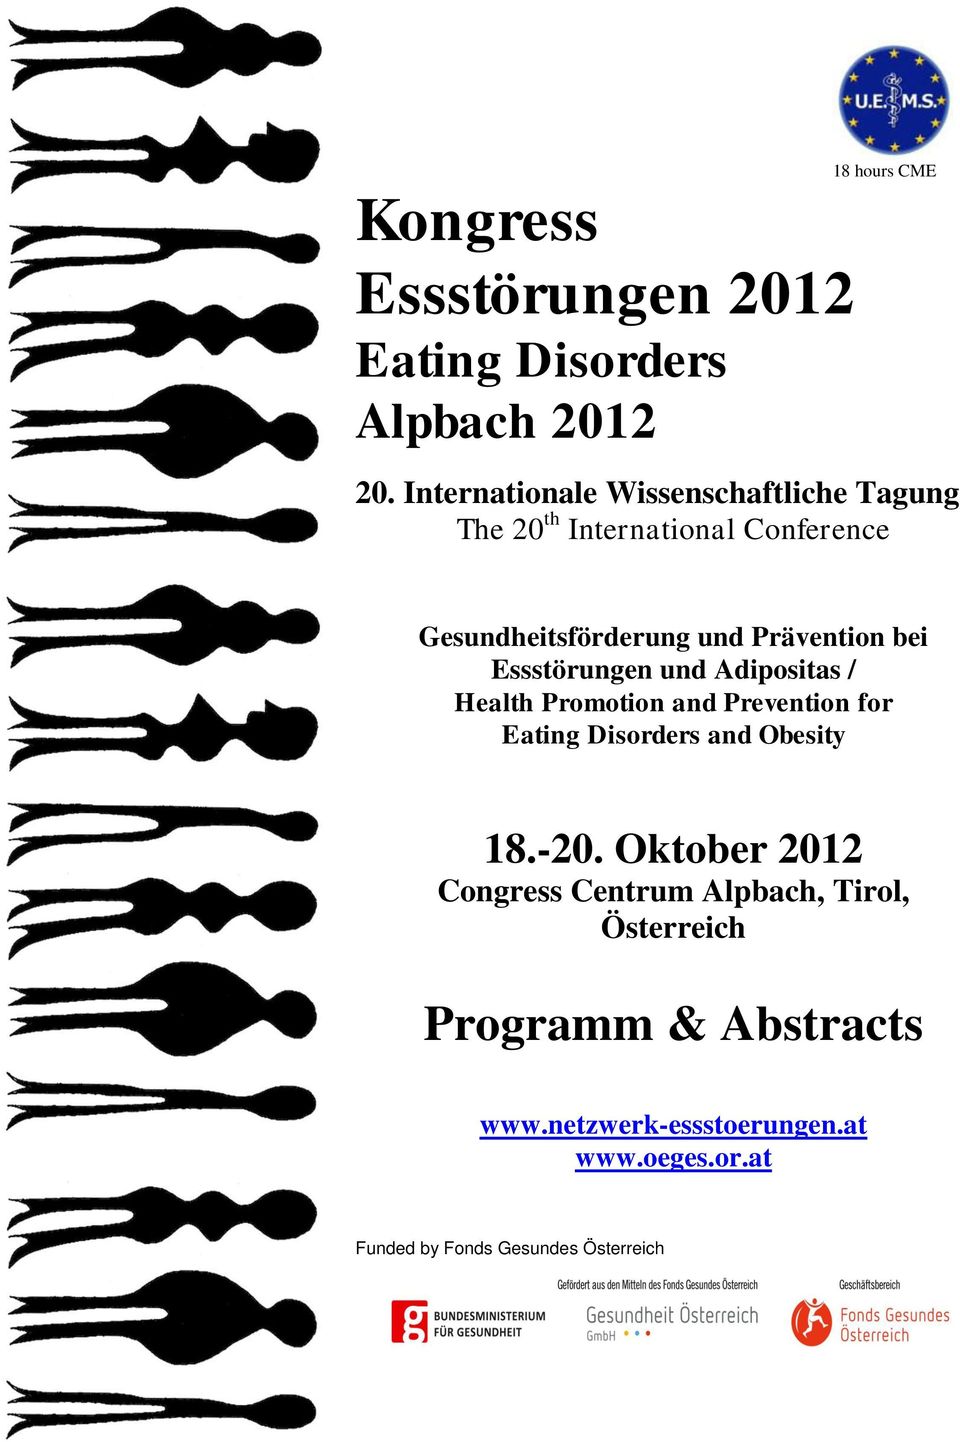 bei Essstörungen und Adipositas / Health Promotion and Prevention for Eating Disorders and Obesity 18.-20.